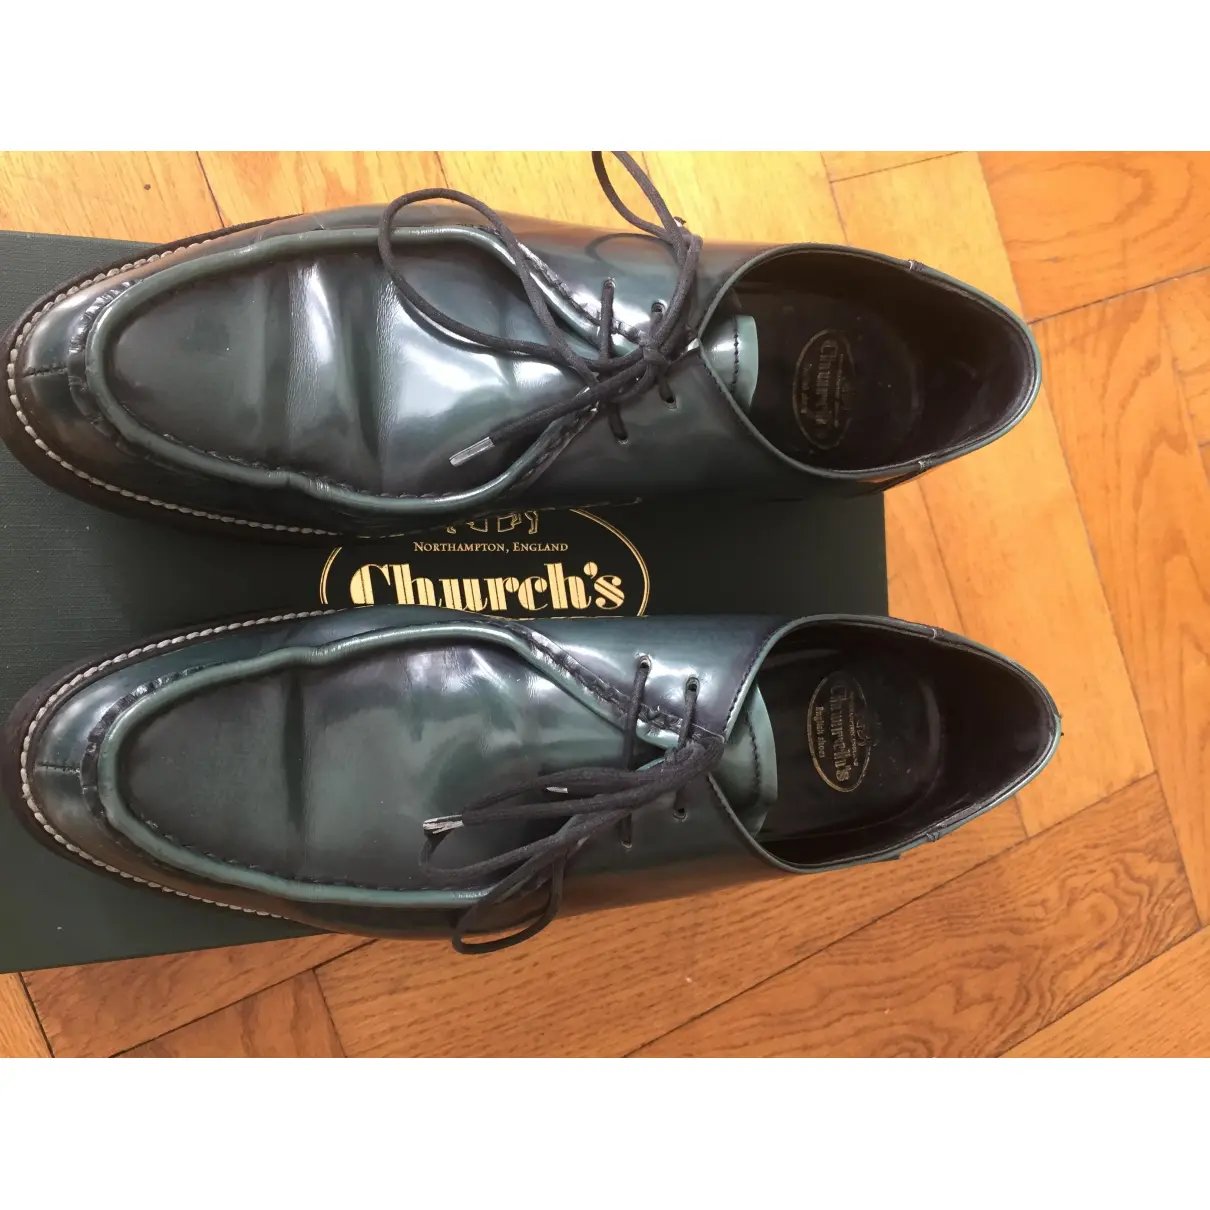 Patent leather lace ups Church's - Vintage